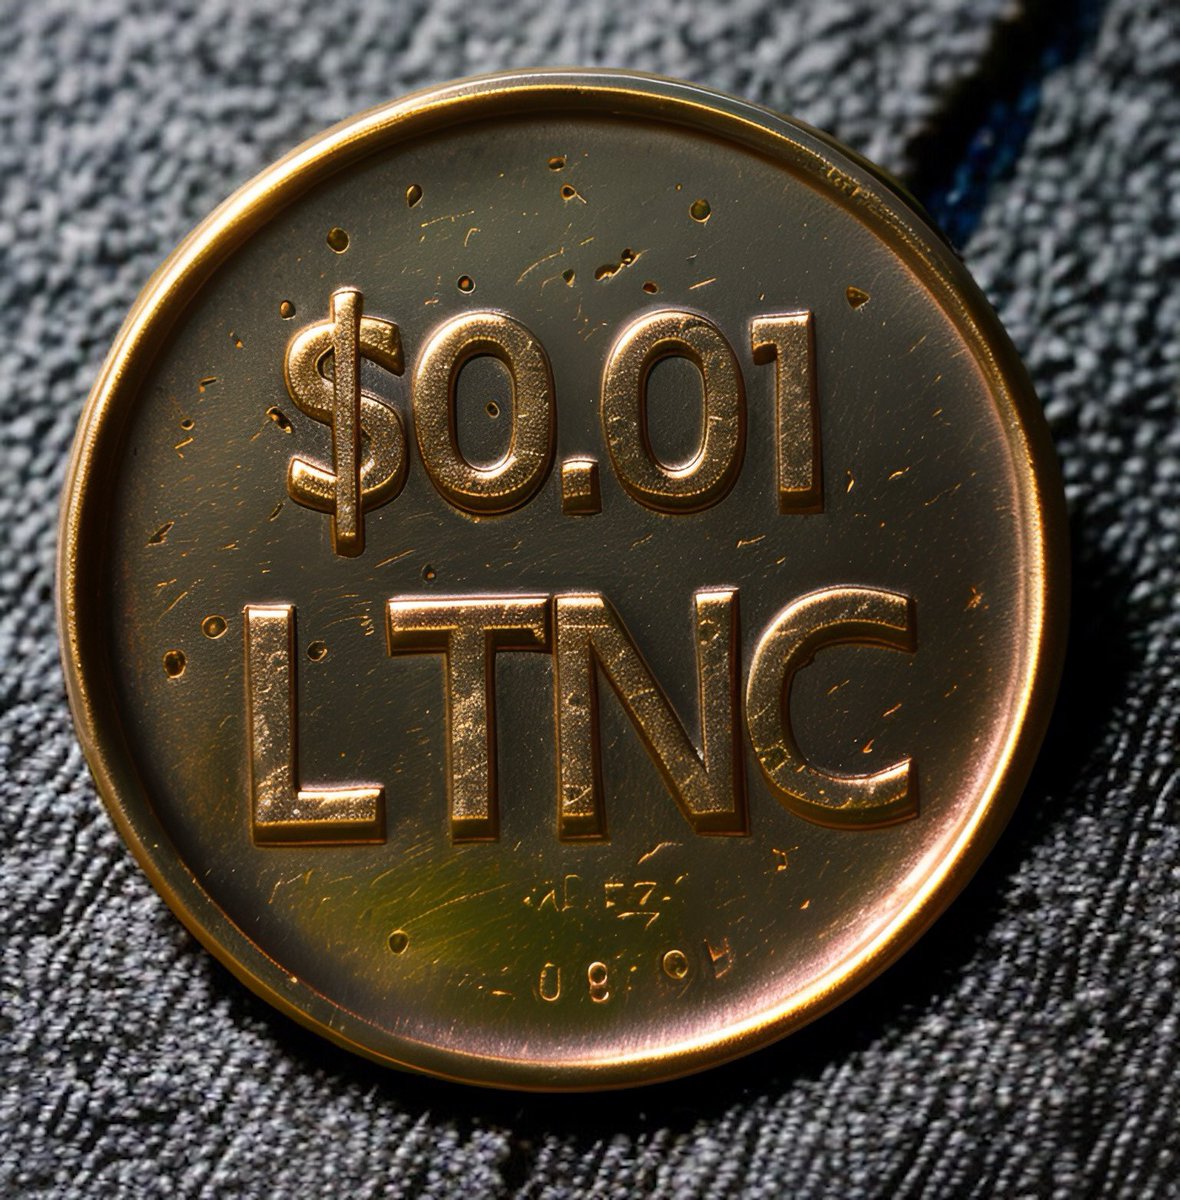 $LTNC BACK to $0.01 This company WILL succeed , the team is legit , the shareholders are legit , every successful company has its dumbasses who believe it will fail, we all know what we hold, the world will soon find out #LOCKDIN #LOCKDINation